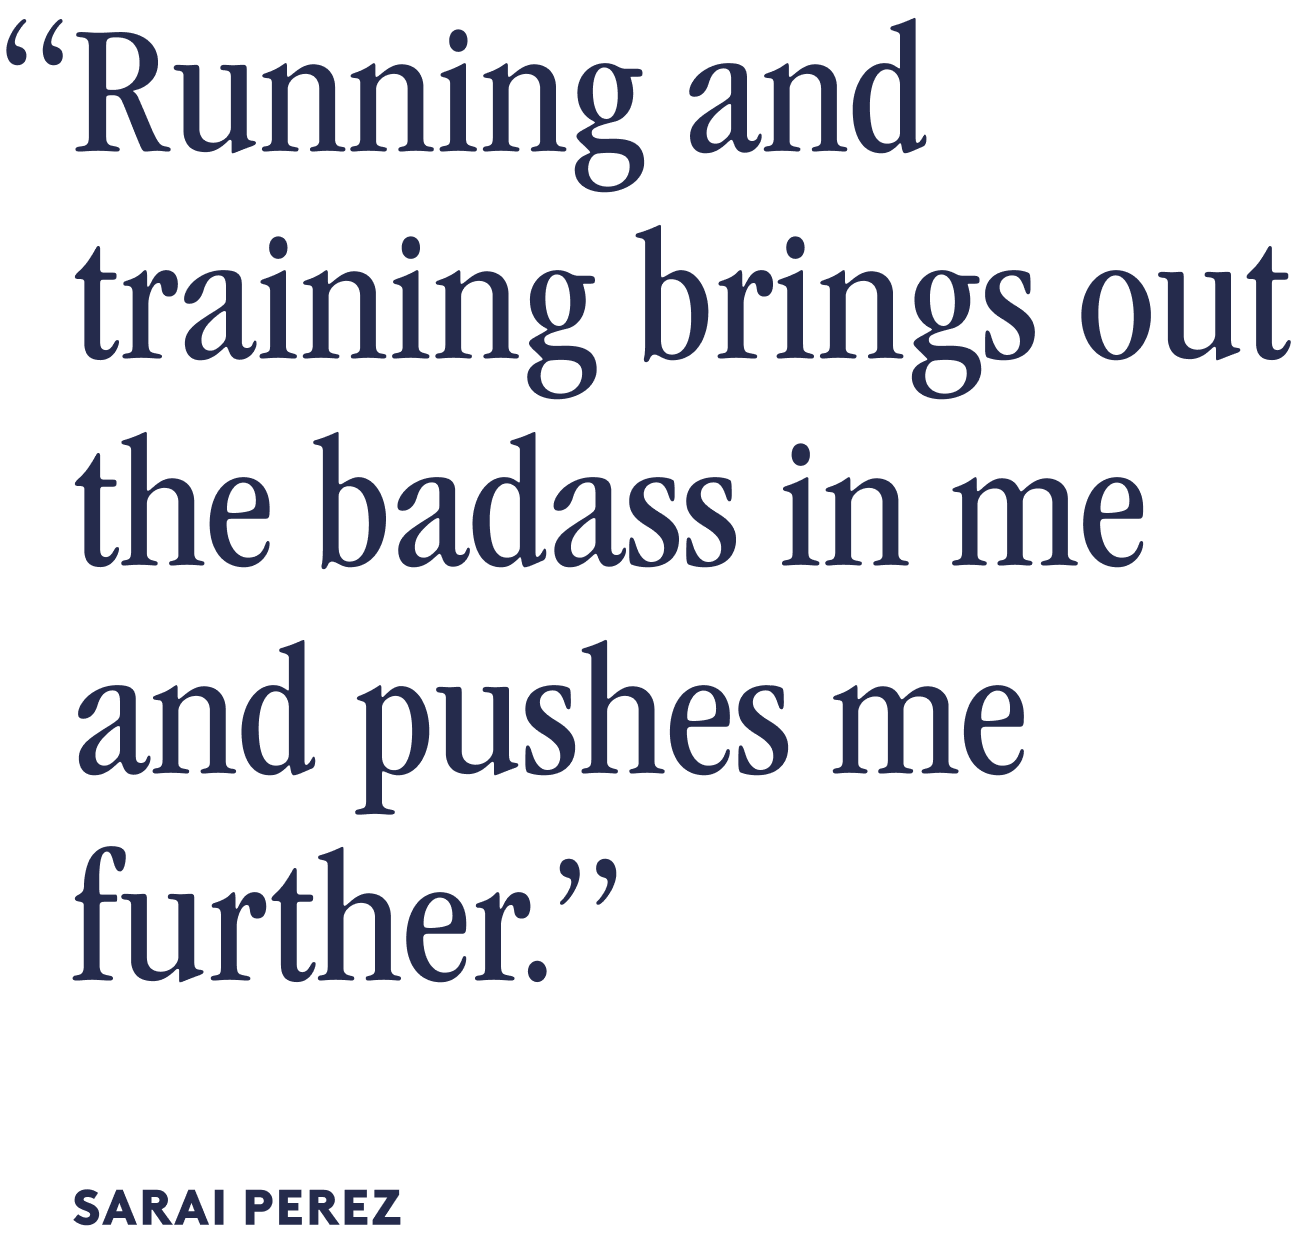 “Running And Training Brings Out The Badass In Me And Pushes Me Further. - Sarai Perez